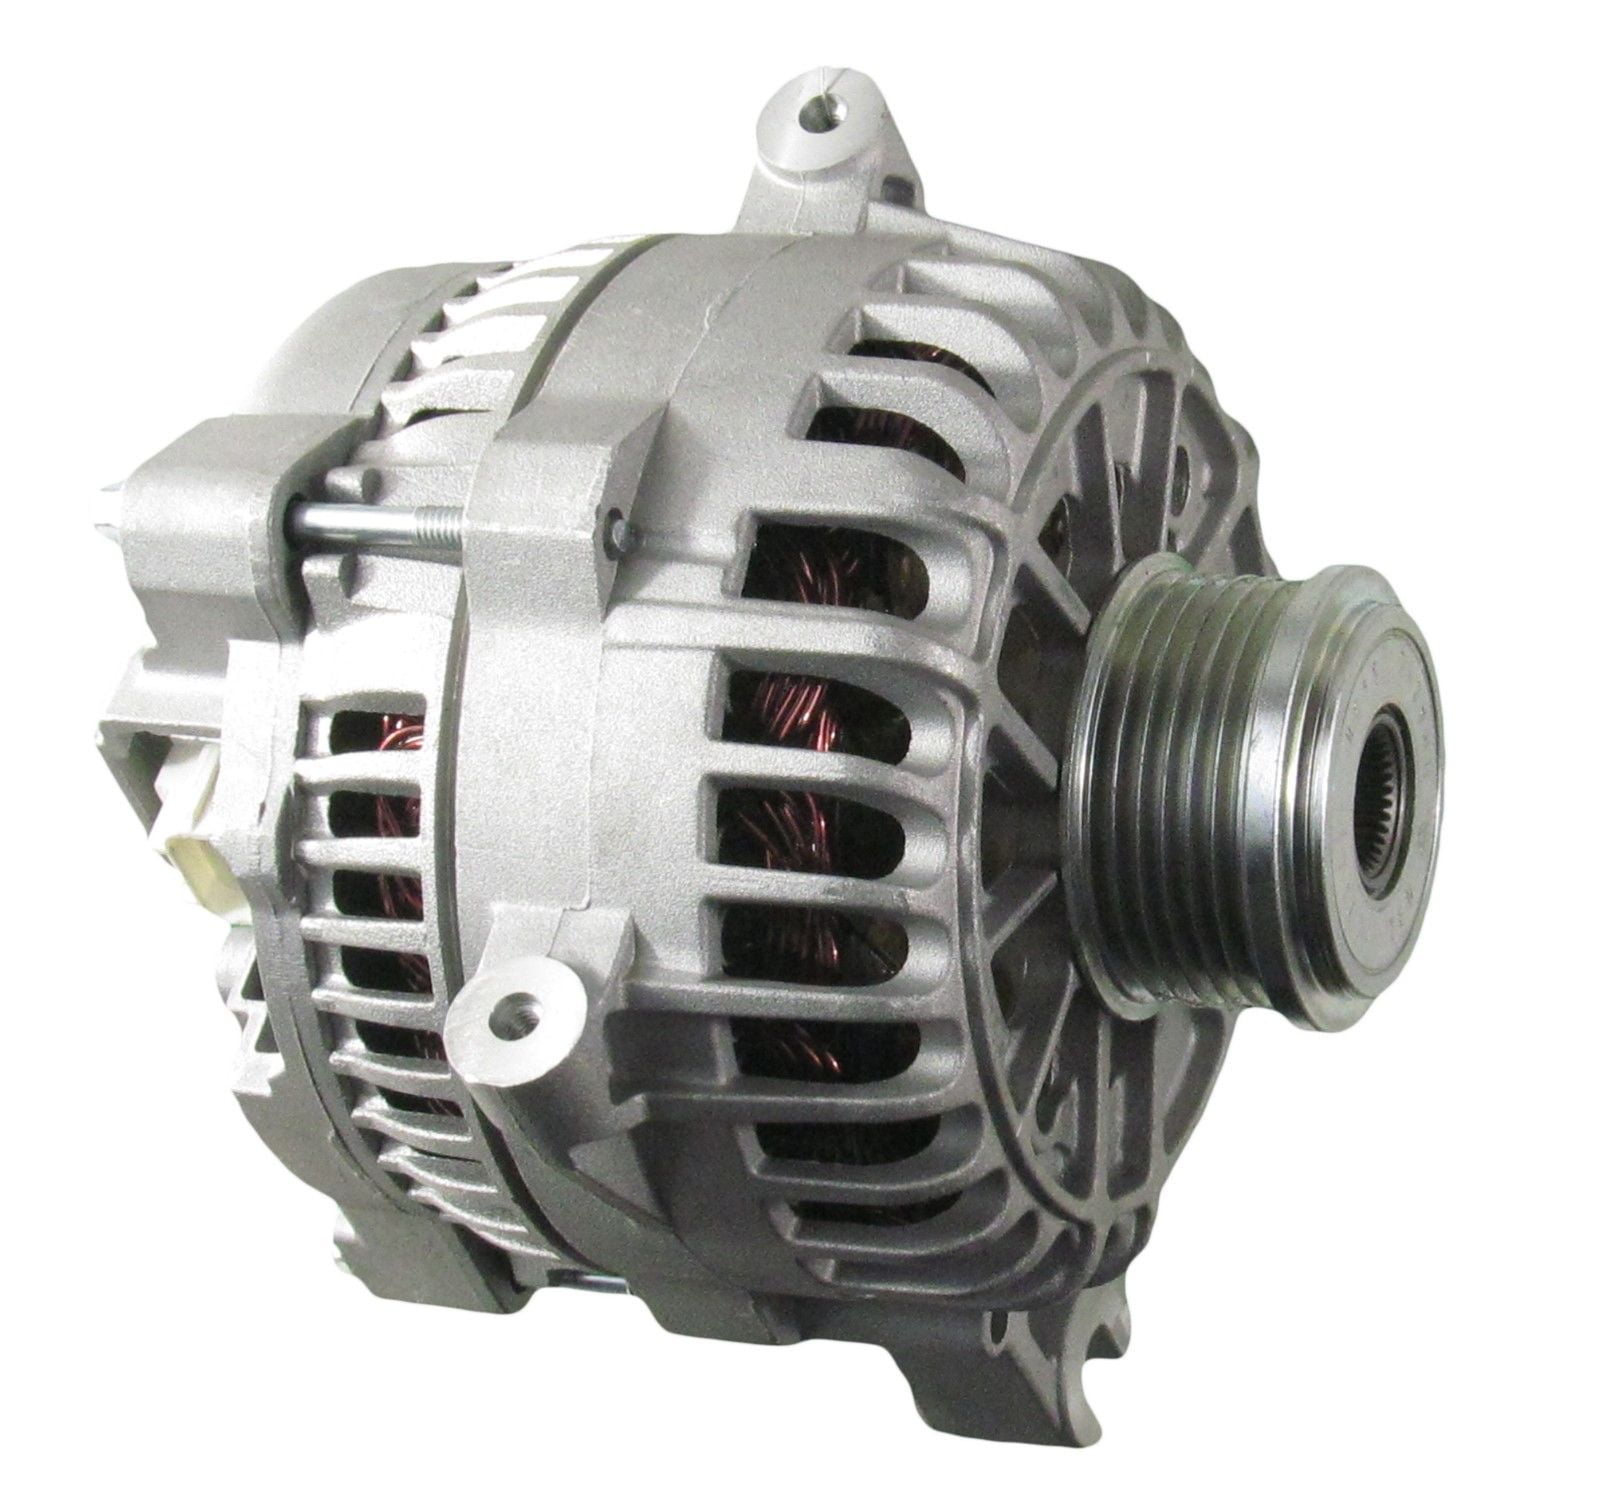 HIGH OUTPUT ALTERNATOR Fits FORD MUSTANG 3.8 3.9 4.6L 2001 2002 2003 2004 200AMP